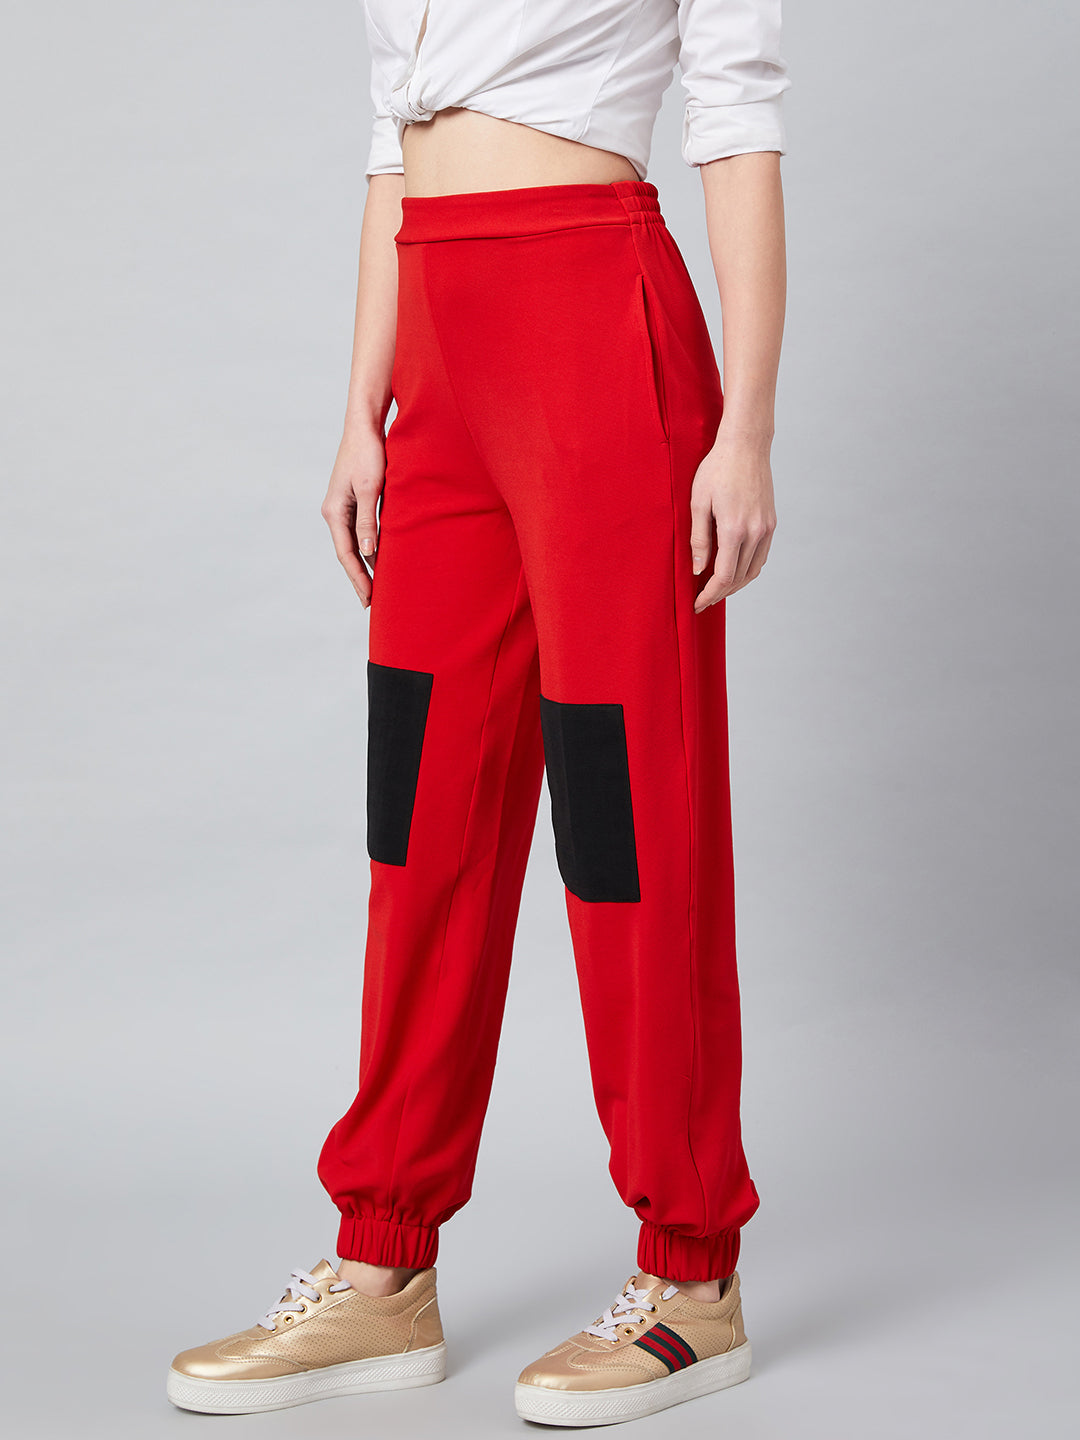 Athena Women Red & Black Loose Fit Solid Joggers - Athena Lifestyle